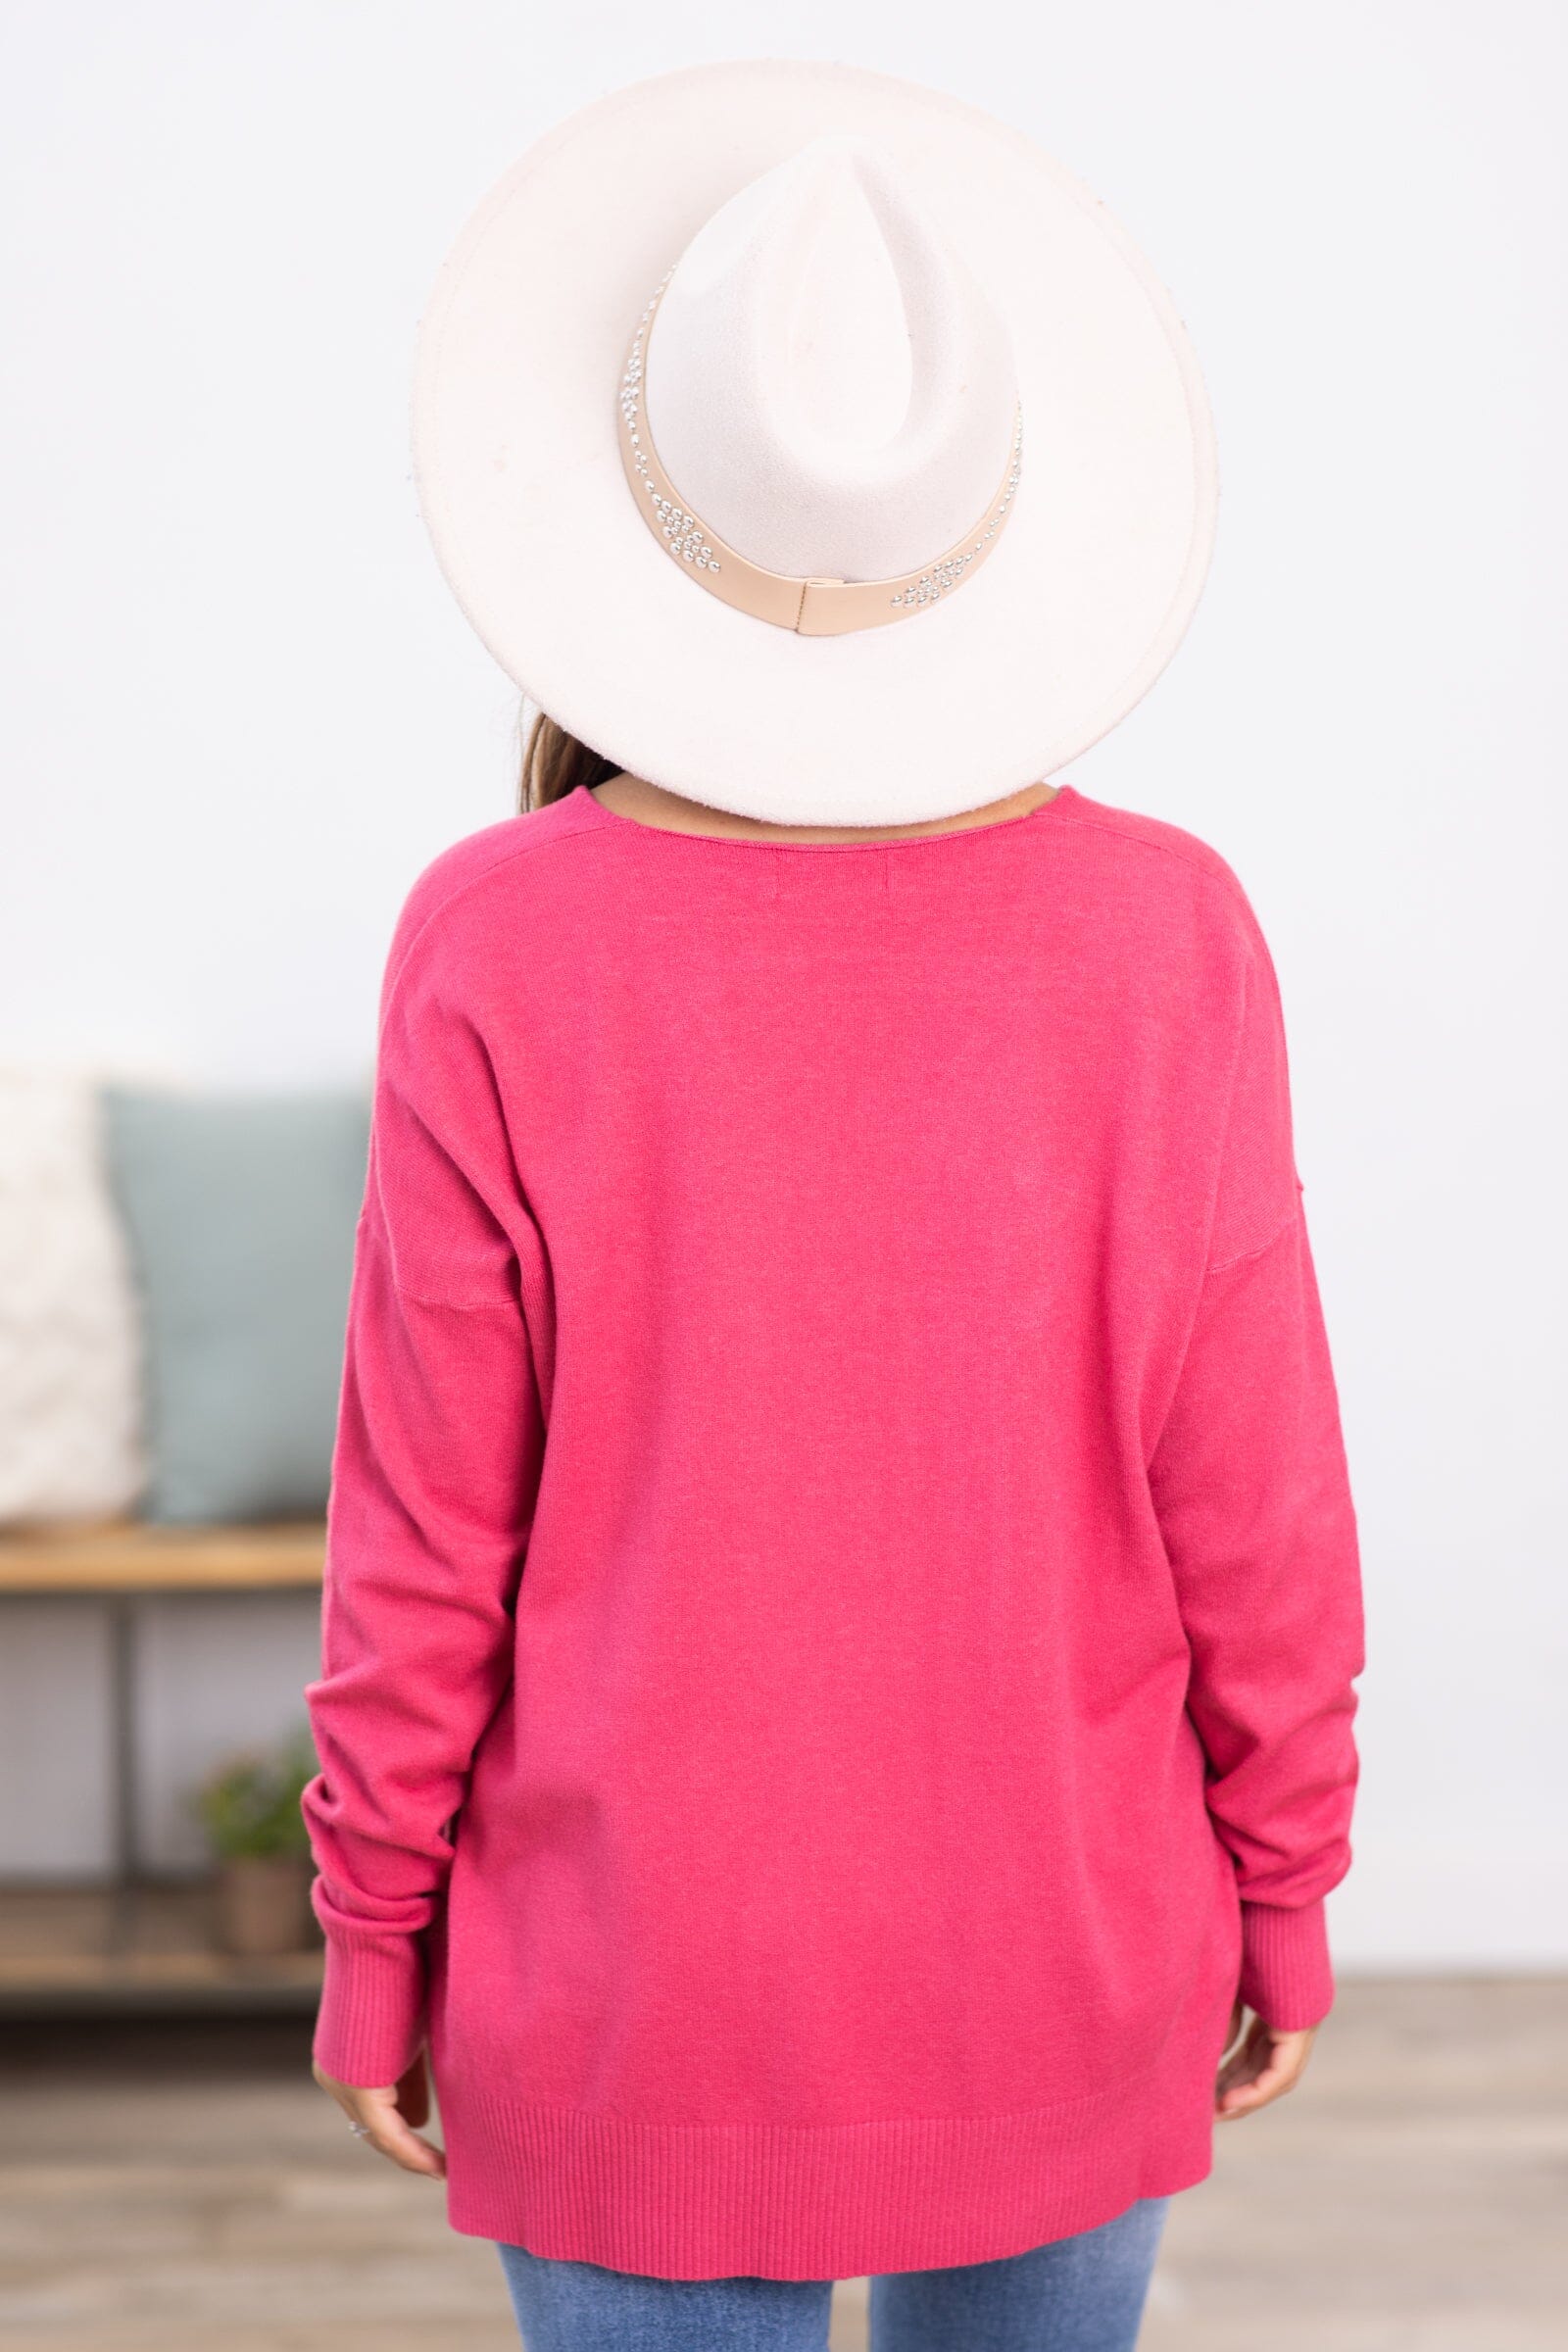 Hot Pink Front Seam Garment Dyed Sweater - Filly Flair